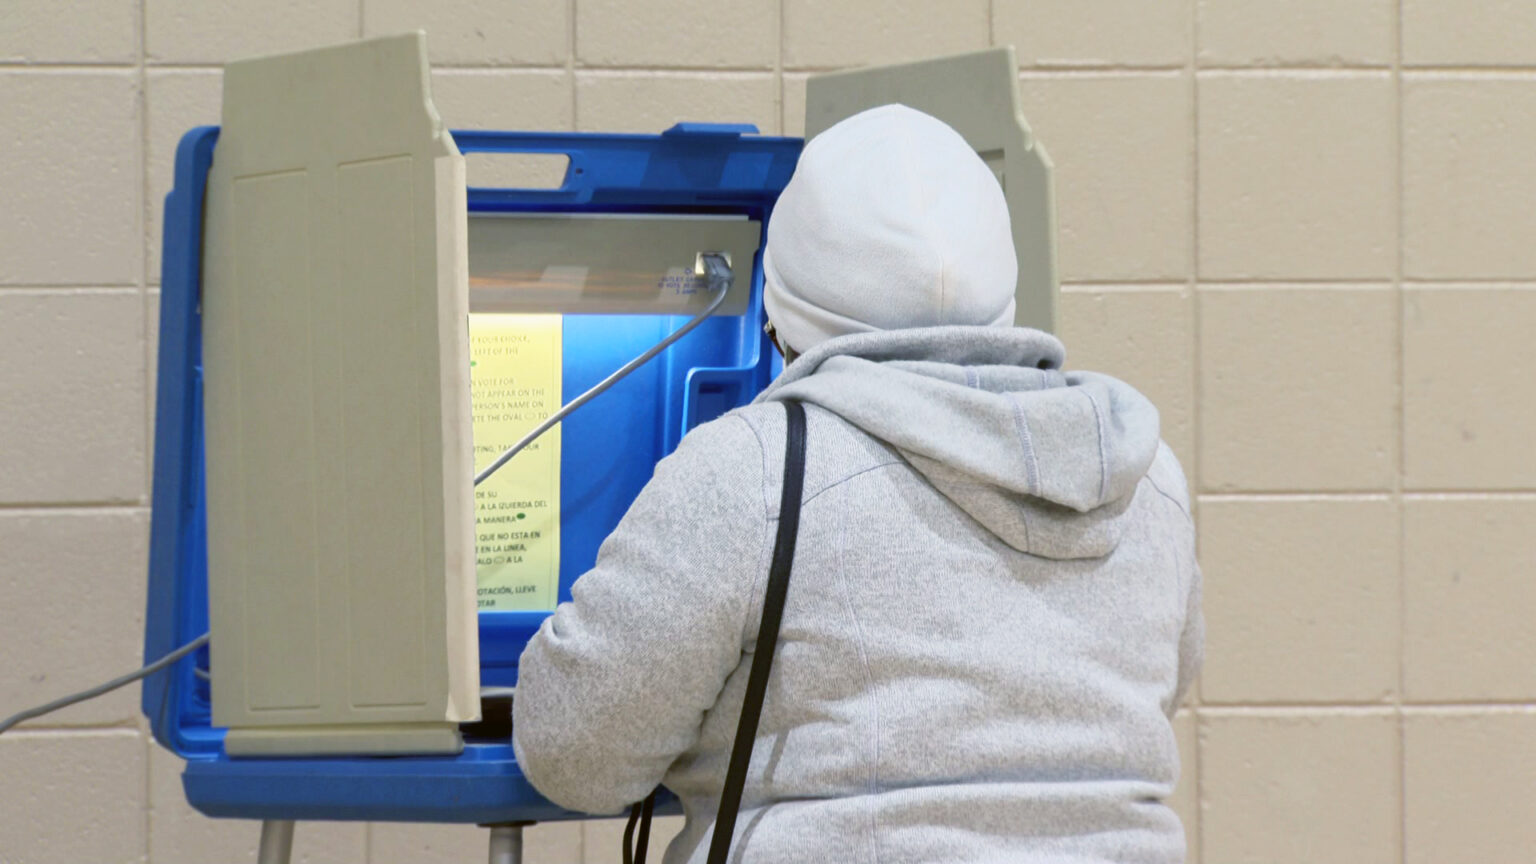 A voter fills out their ballot while standing at a voting booth with plastic privacy dividers, a light and vote procedure instructions, with a painted concrete block wall in the background.